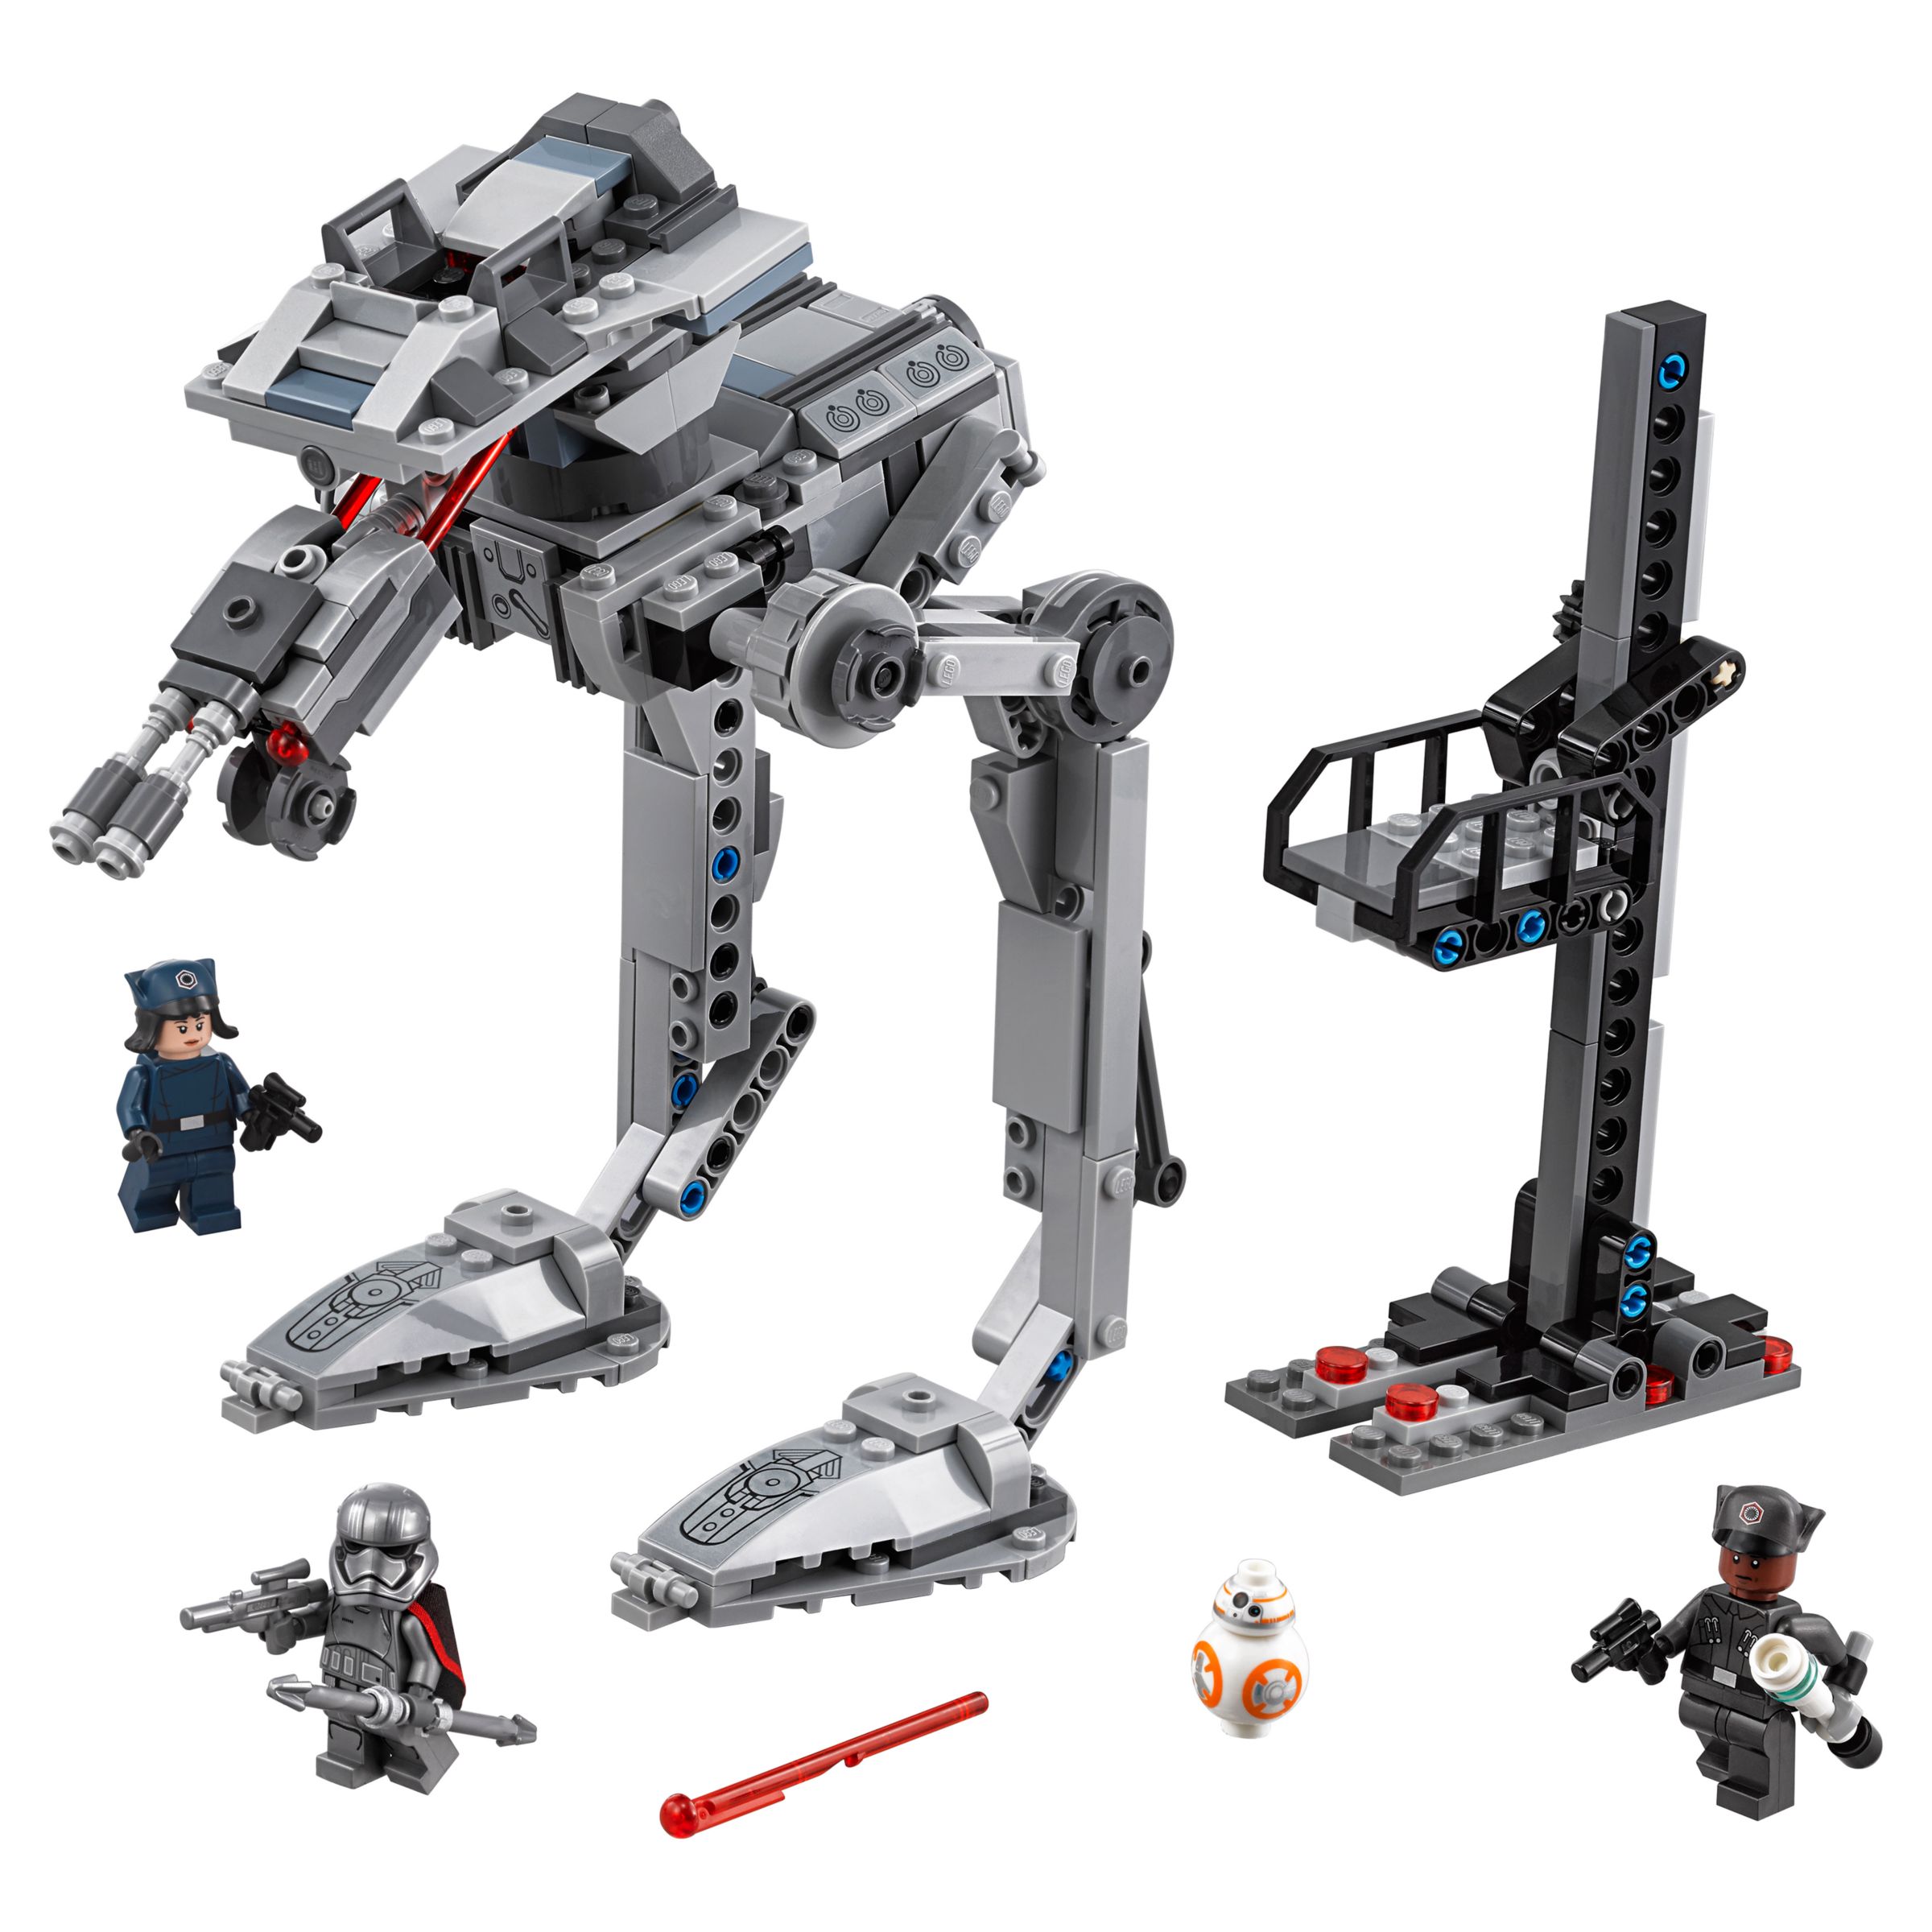 Lego Star Wars The Last Jedi 751 First Order At St Walker At John Lewis Partners